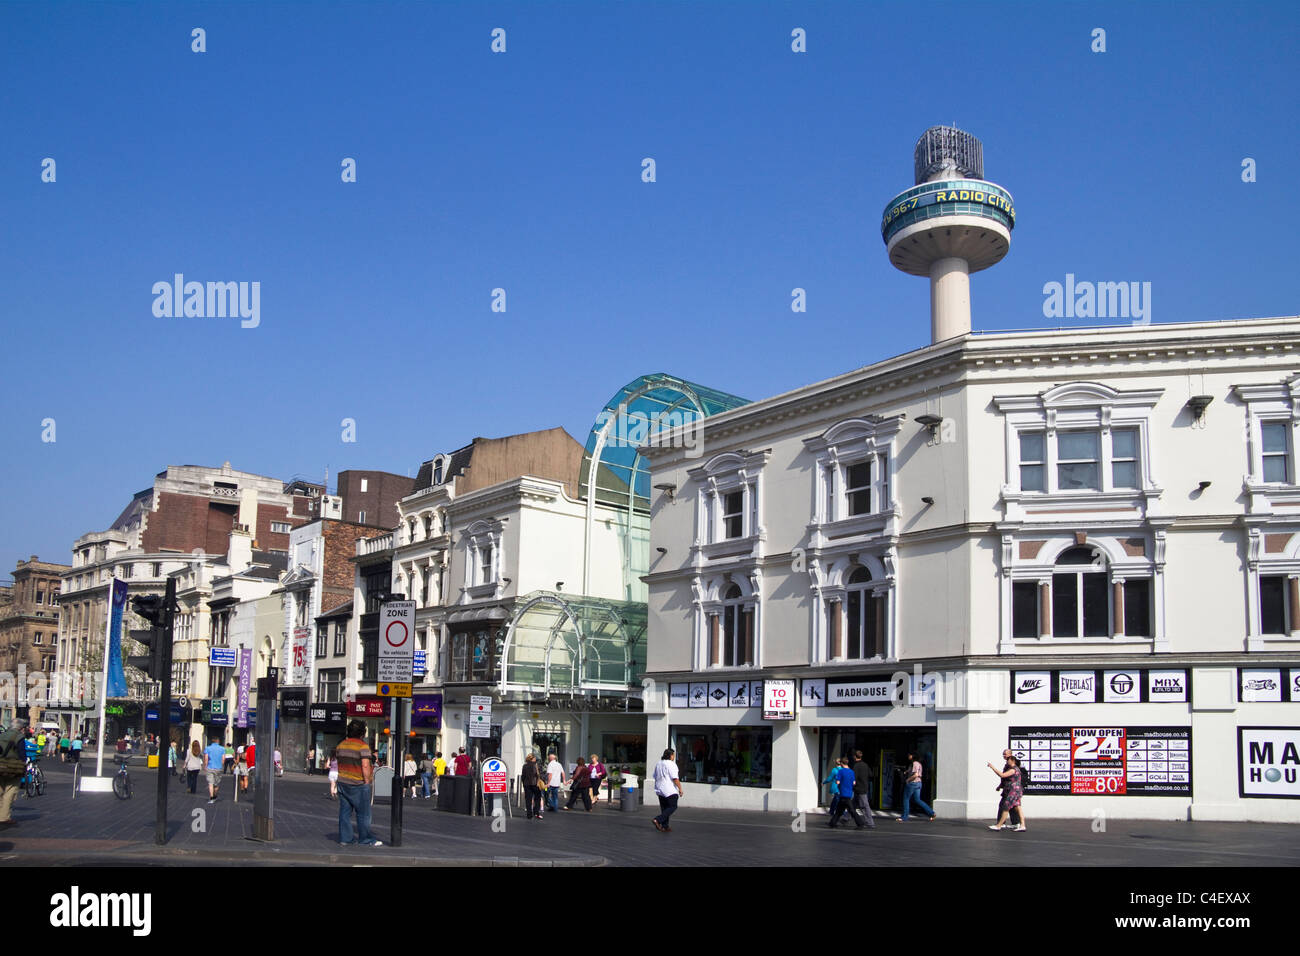 Clayton Square shopping centre and Radio City Tower in Liverpool, Merseyside, England Stock Photo